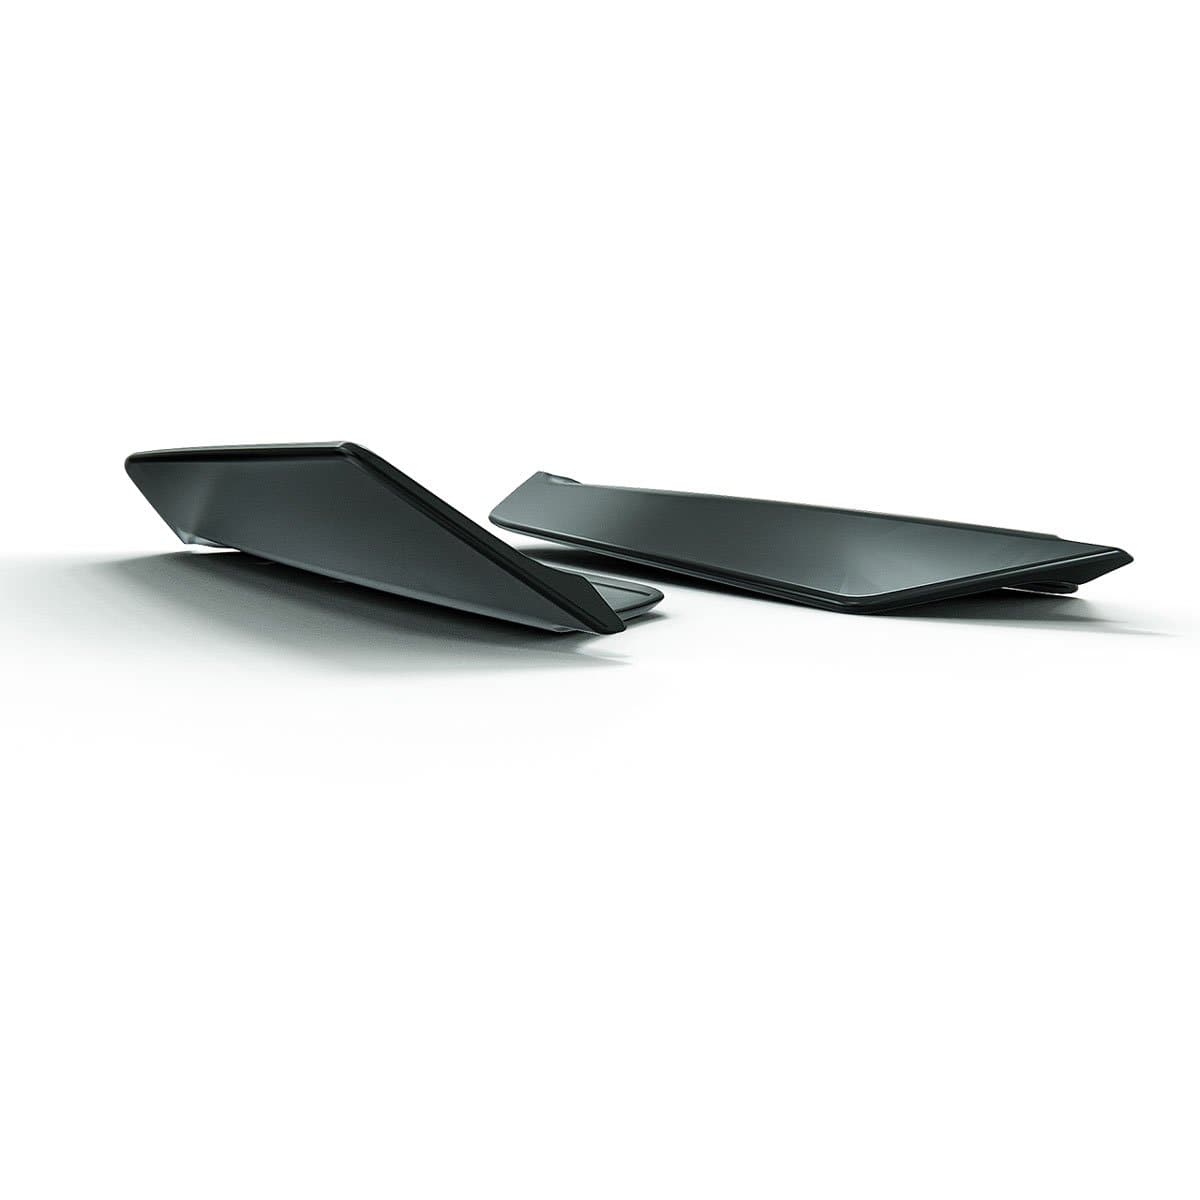 ACS Composite C8 Z51 Spoiler Wickers in Carbon Flash Black for Corvette C8 Stingray (SKU: 50-4-063CFZ) - Enhanced aerodynamics and distinctive style for your vehicle.